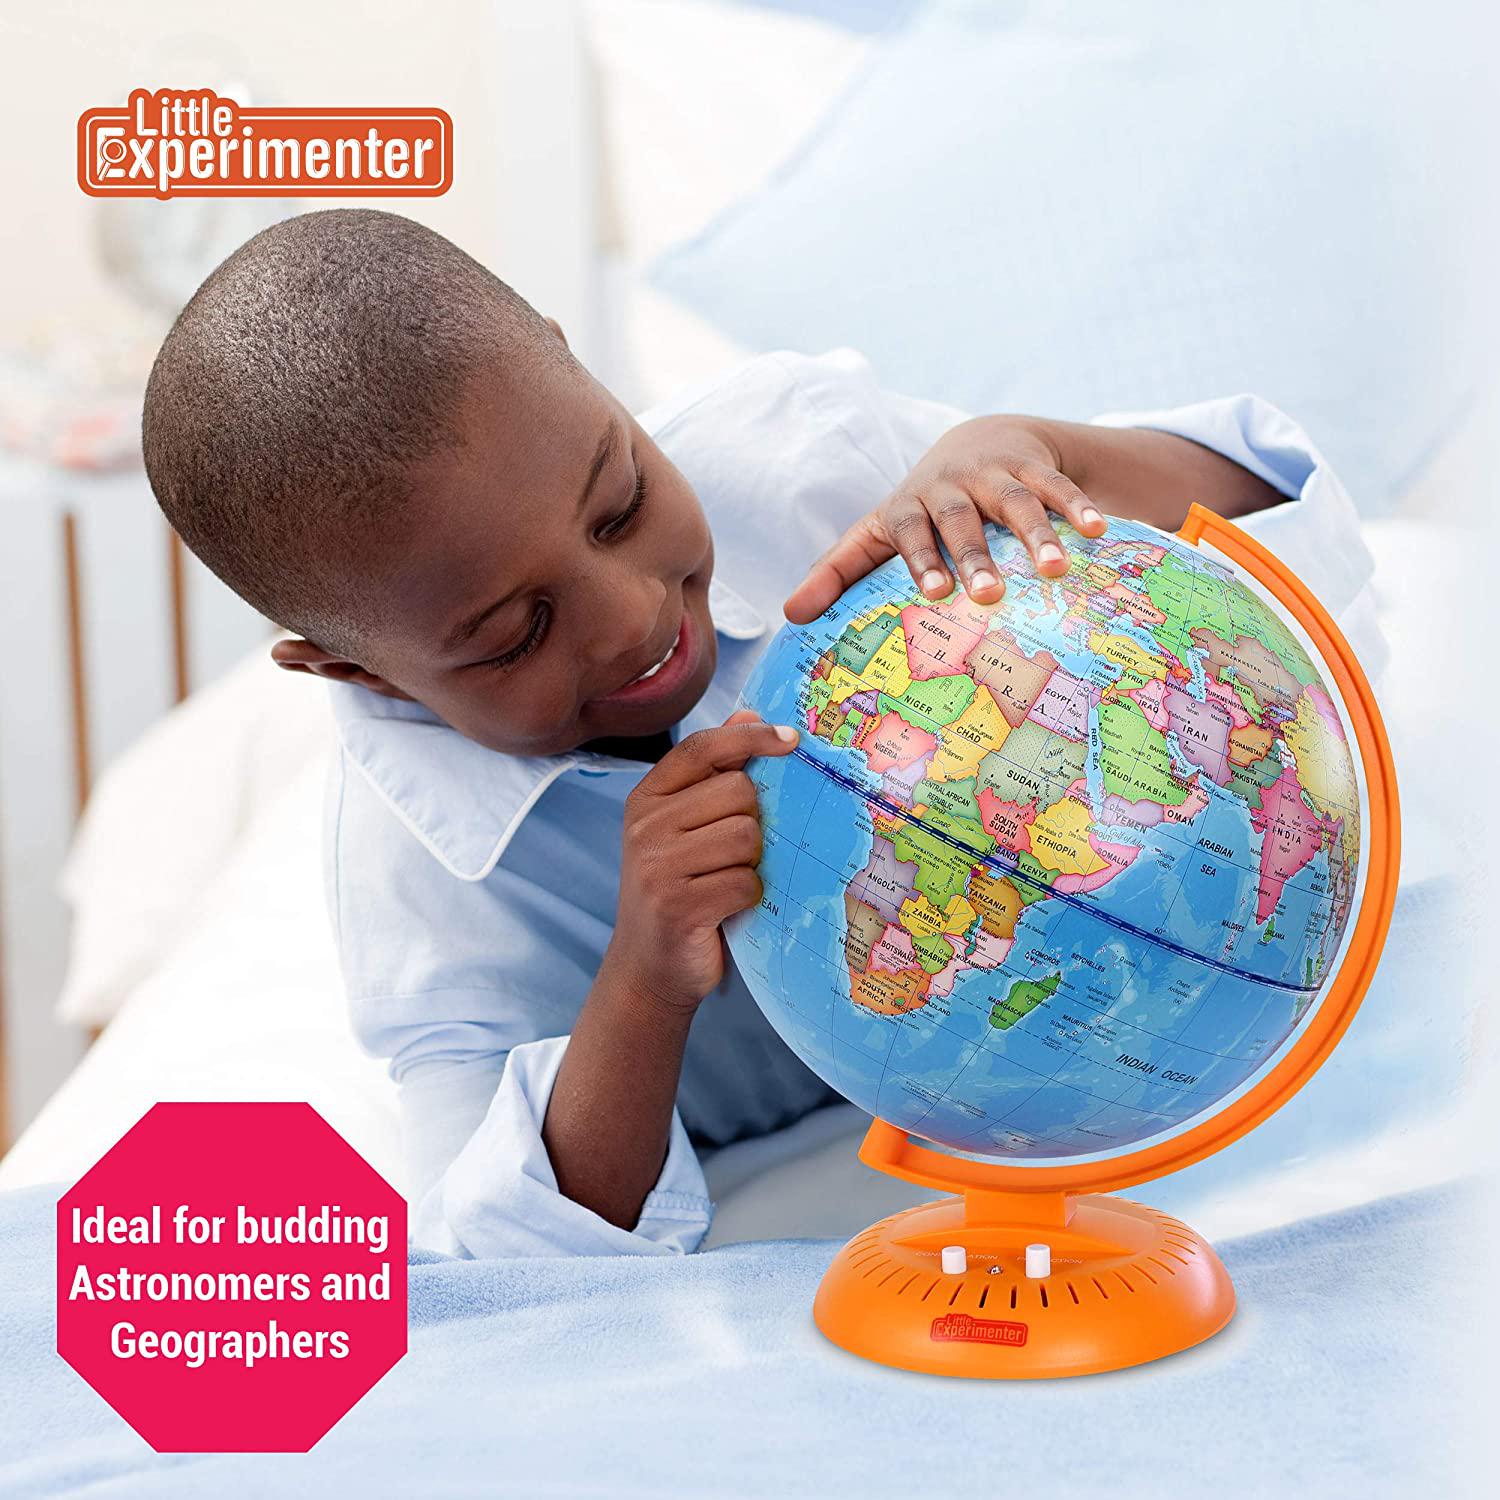 Little Experimenter, Little Experimenter Globe for Kids: 3-in-1 World Globe with Illuminated Star Map and Built-in Projector, 8